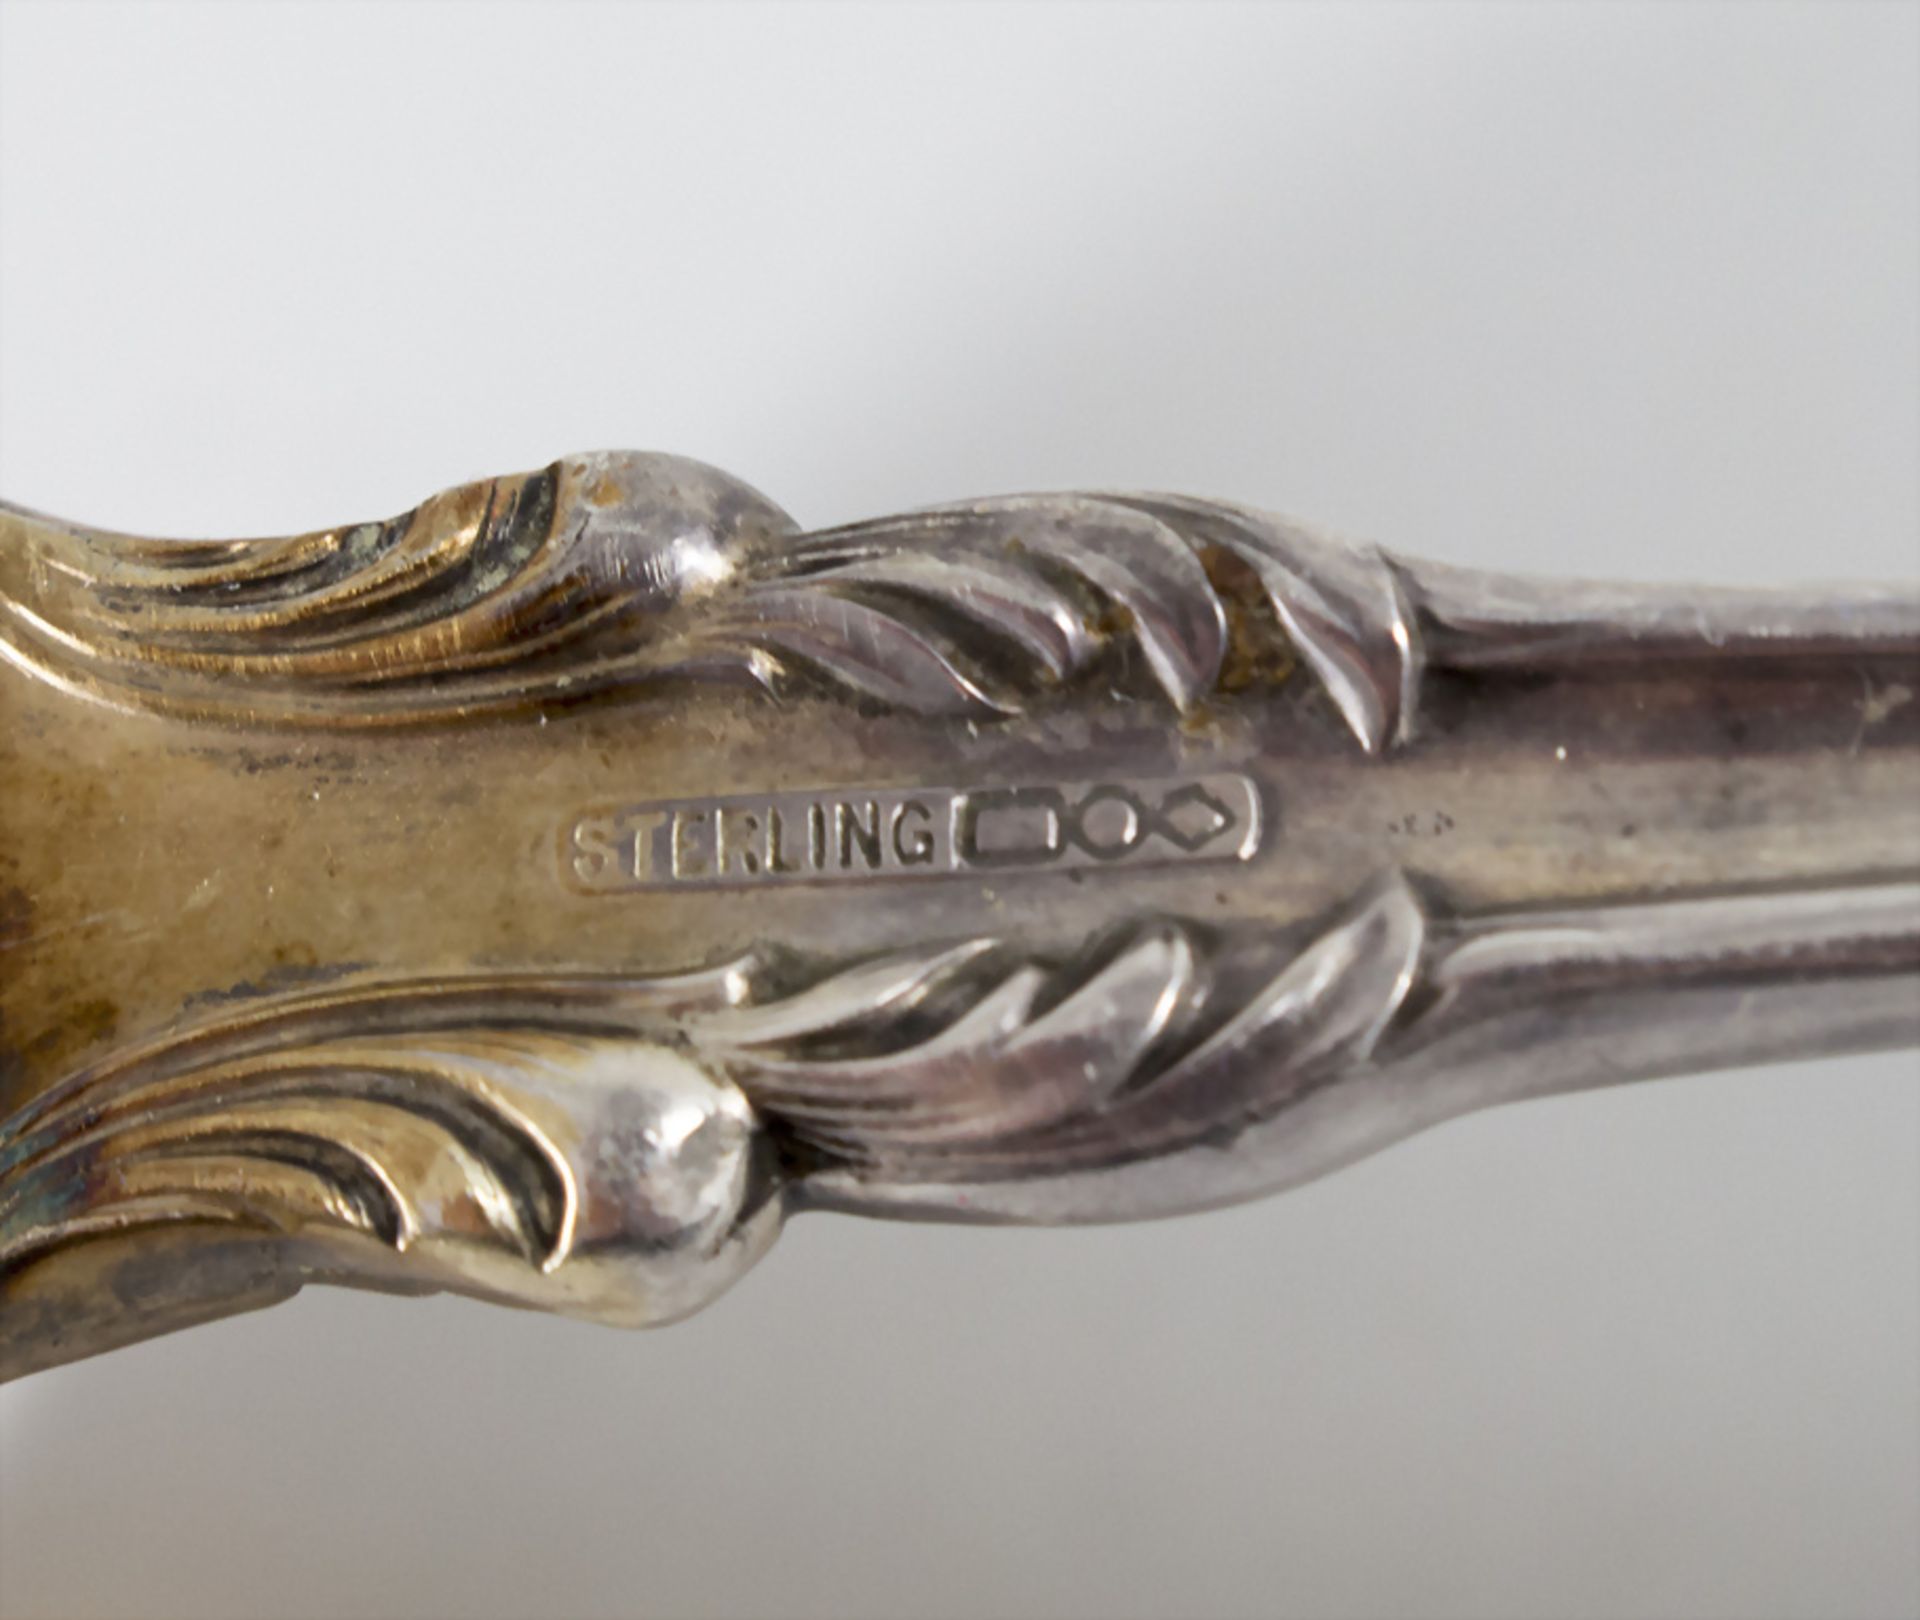 Suppenkelle 'No. 10' / A silver blossom soup ladle 'No. 10', Dominick & Haff, New York, um 1896 - Image 4 of 7